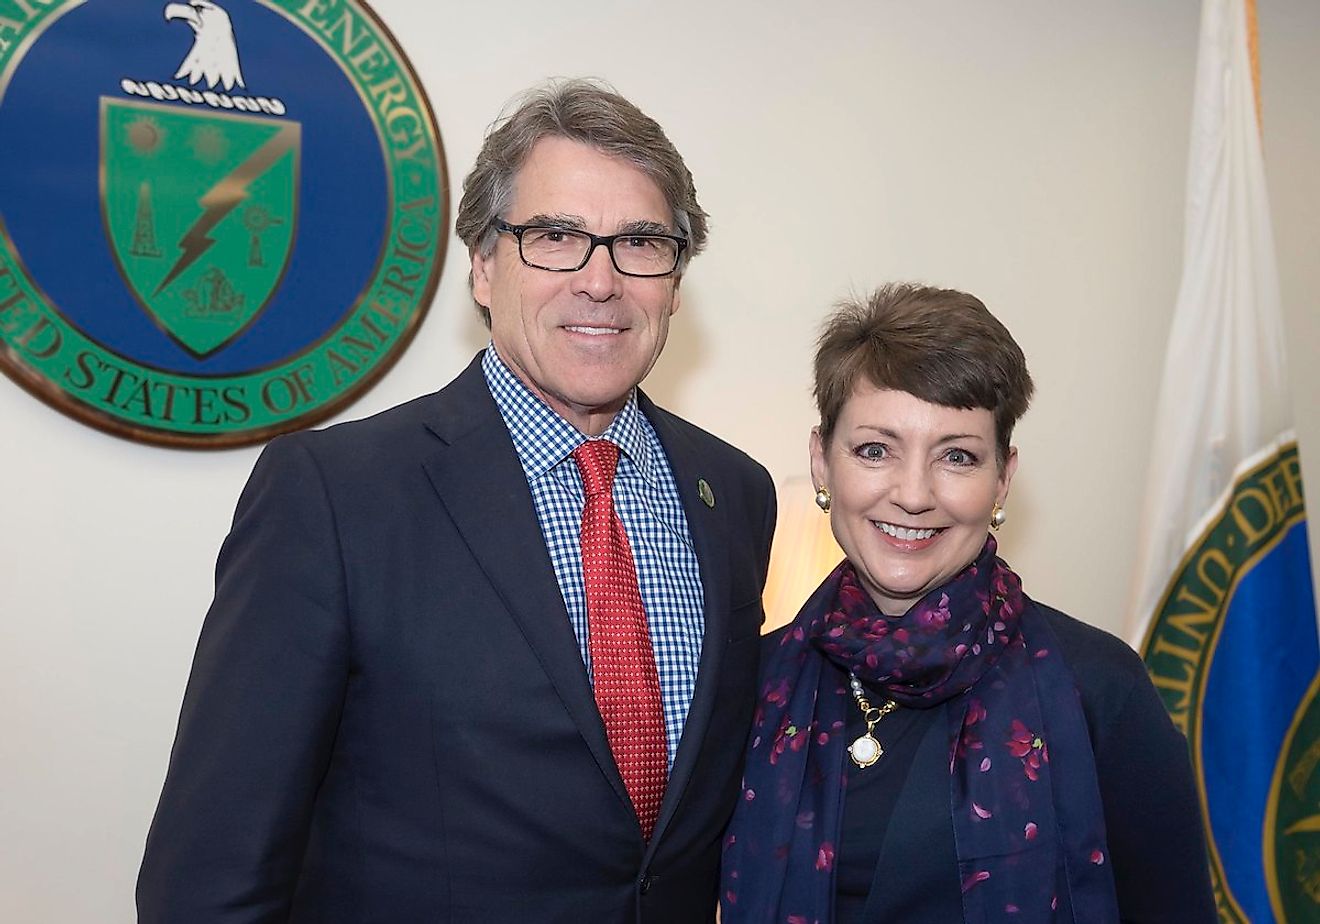 Secretary R. Perry meets with Lynn J. Good. Image credit: US Department of Energy/Flickr.com